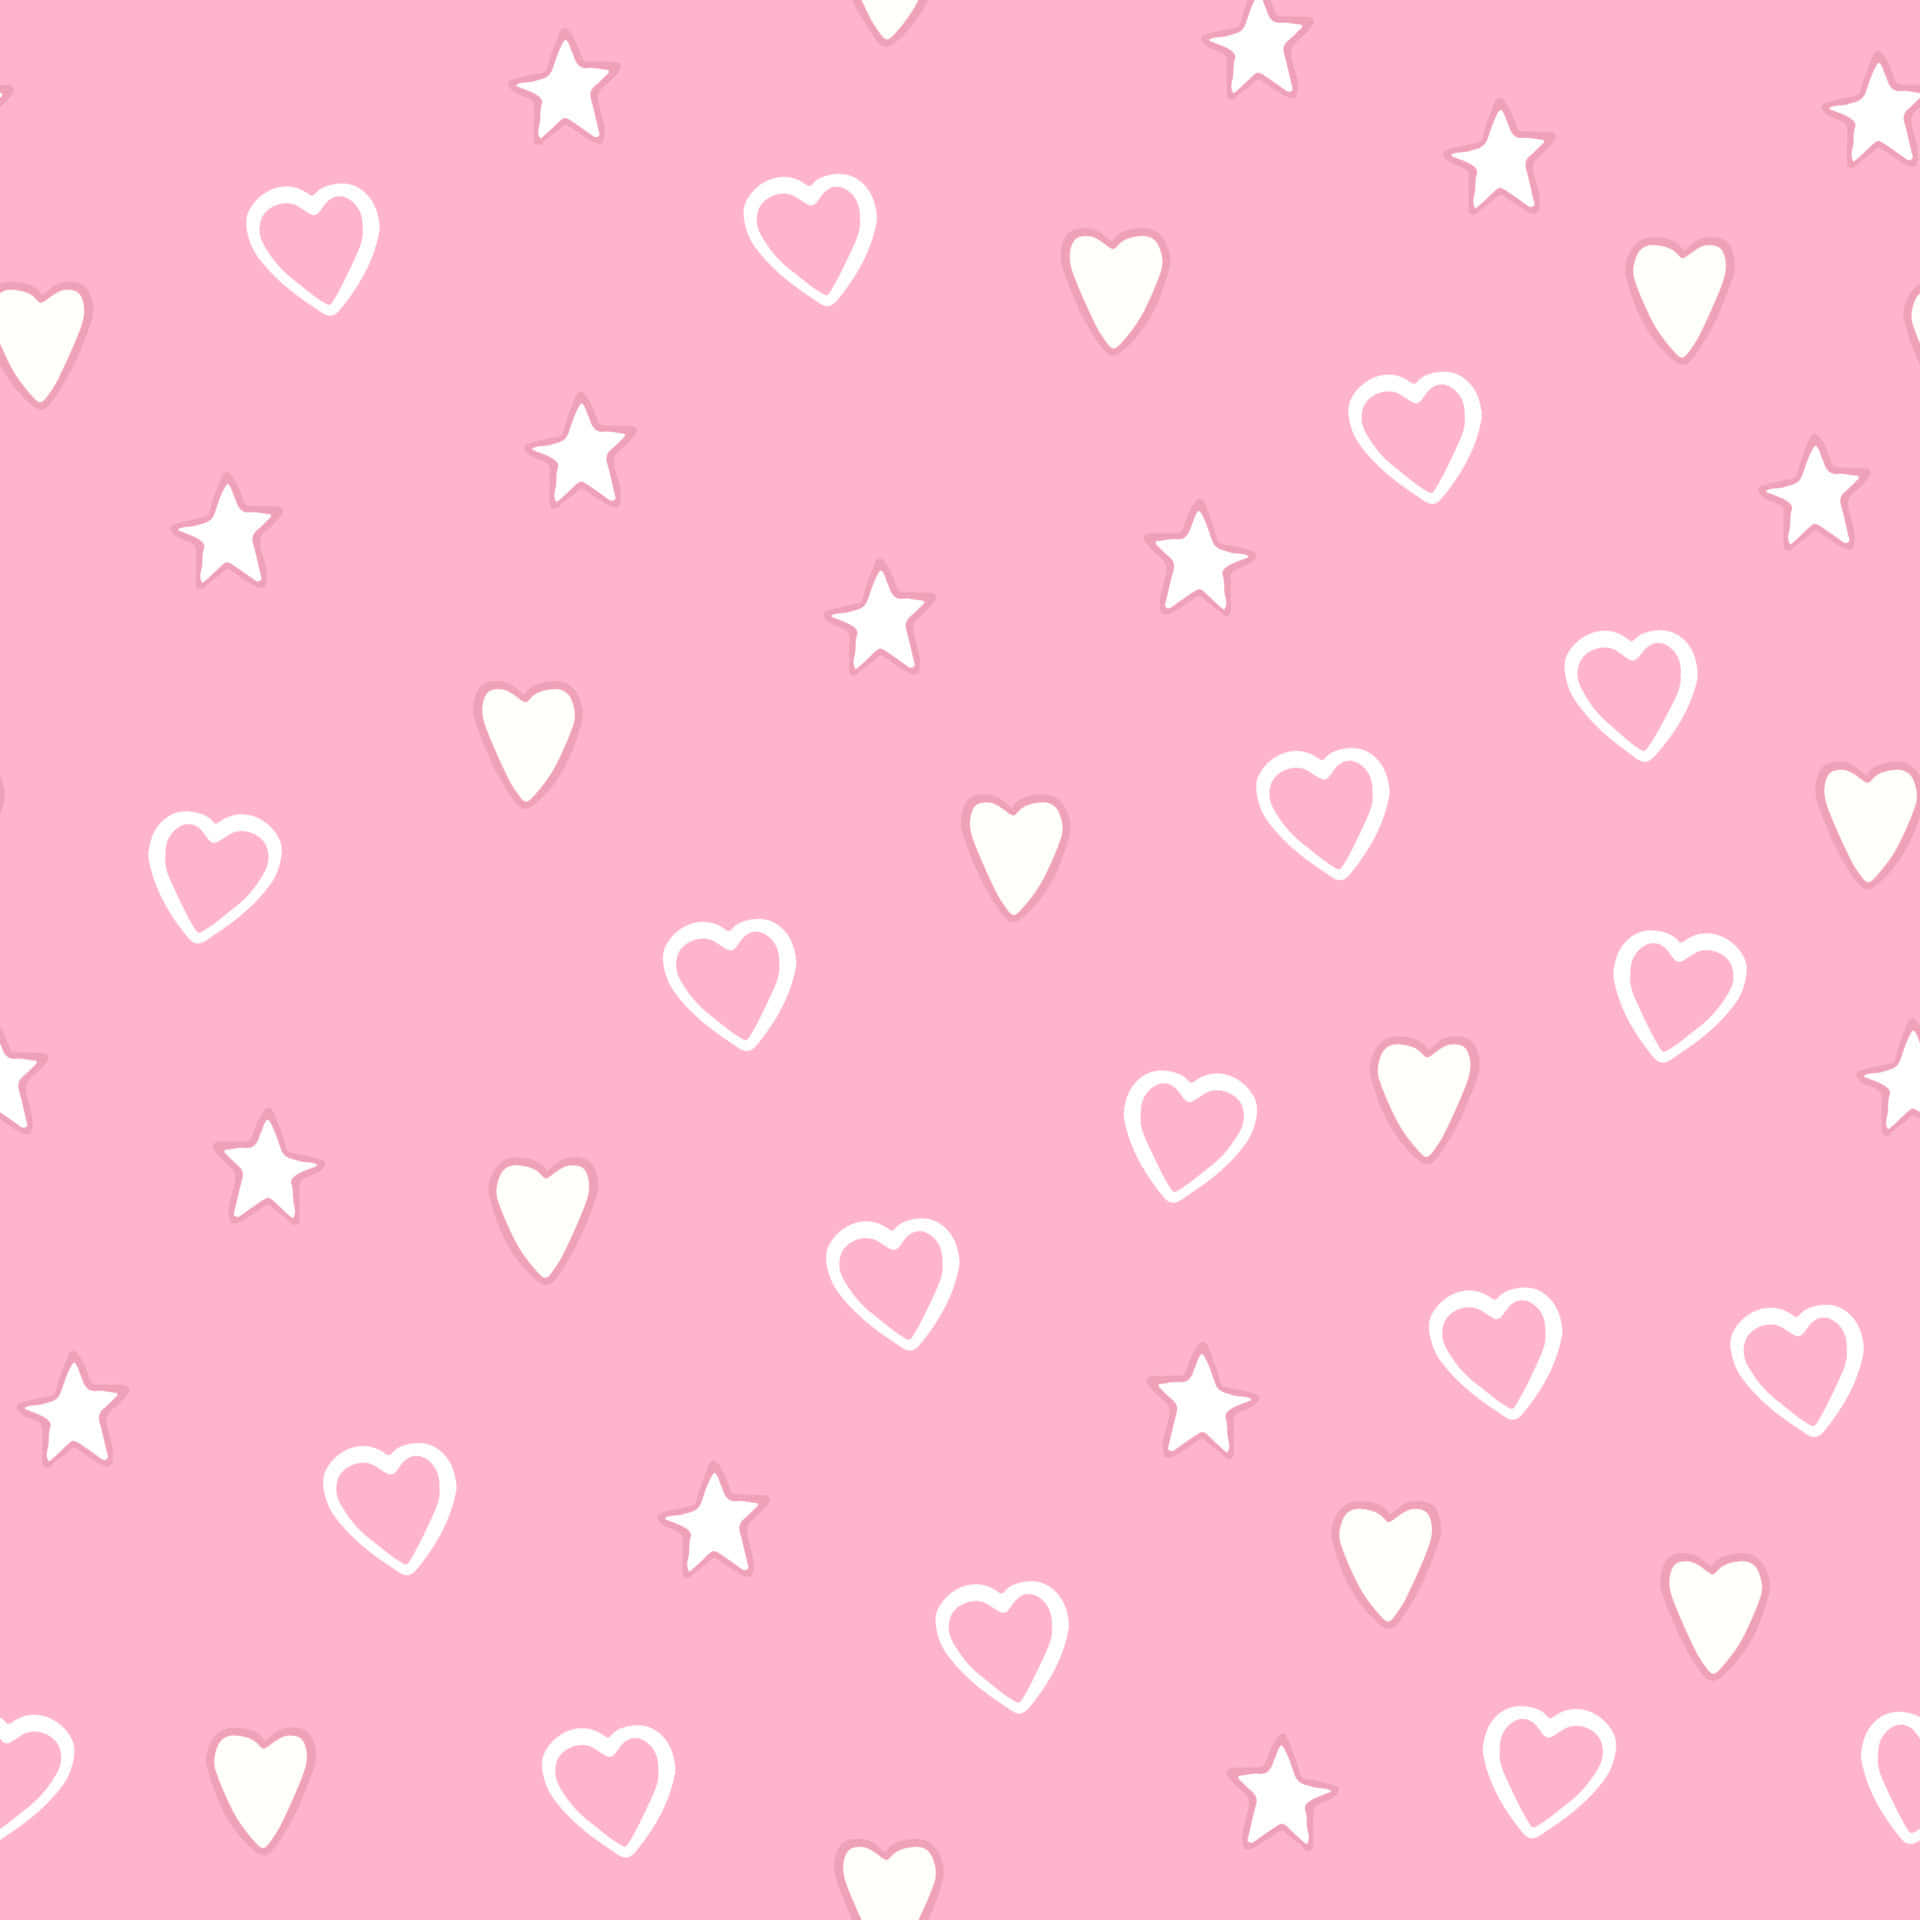 A Pink Background With White Hearts And Stars Wallpaper